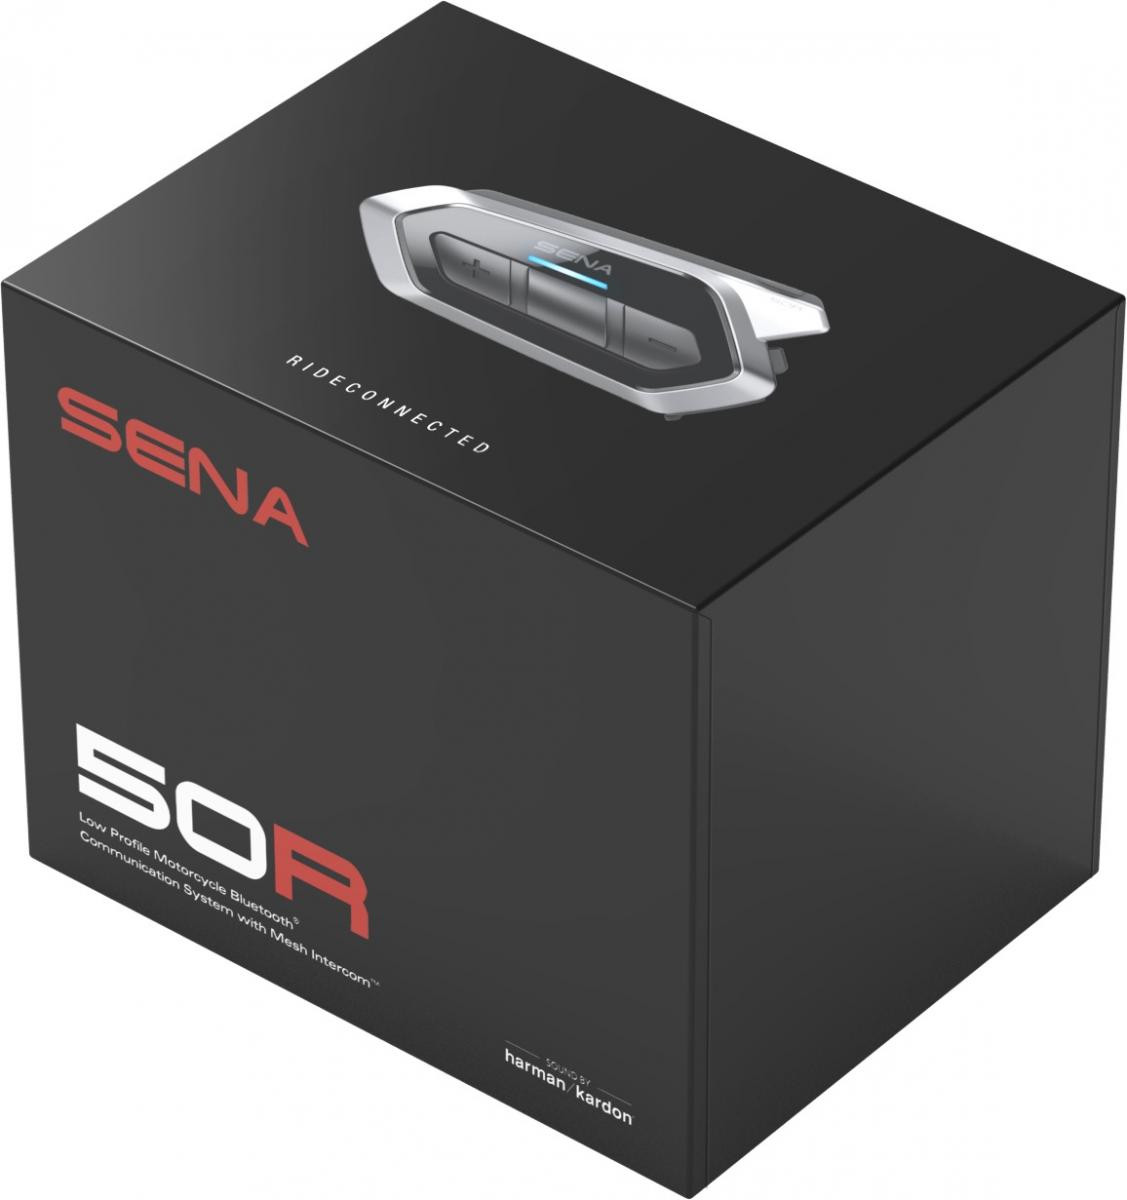 Sena 50R Low Profile Motorcycle Bluetooth / Mesh Communication System with SOUND BY Harman Kardon Speakers and Mic